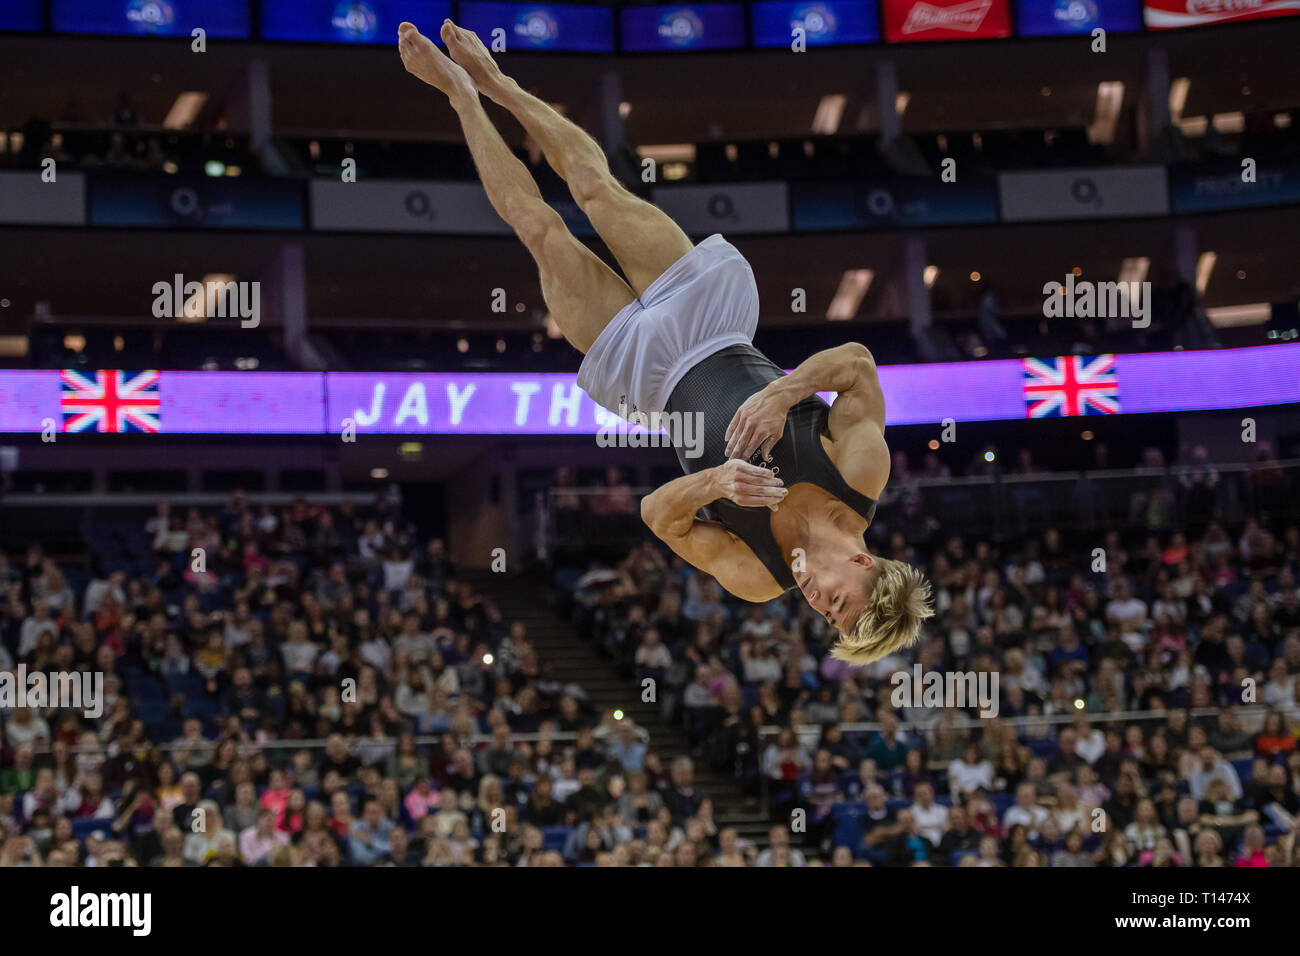 London, UK. 23rd March, 2019. Jay Thompson performs Floor Exercise during the Matchroom Multisport presents the 2019 Superstars of Gymnastics at The O2 Arena on Saturday, 23 March 2019. LONDON ENGLAND. Credit: Taka G Wu/Alamy News Stock Photo